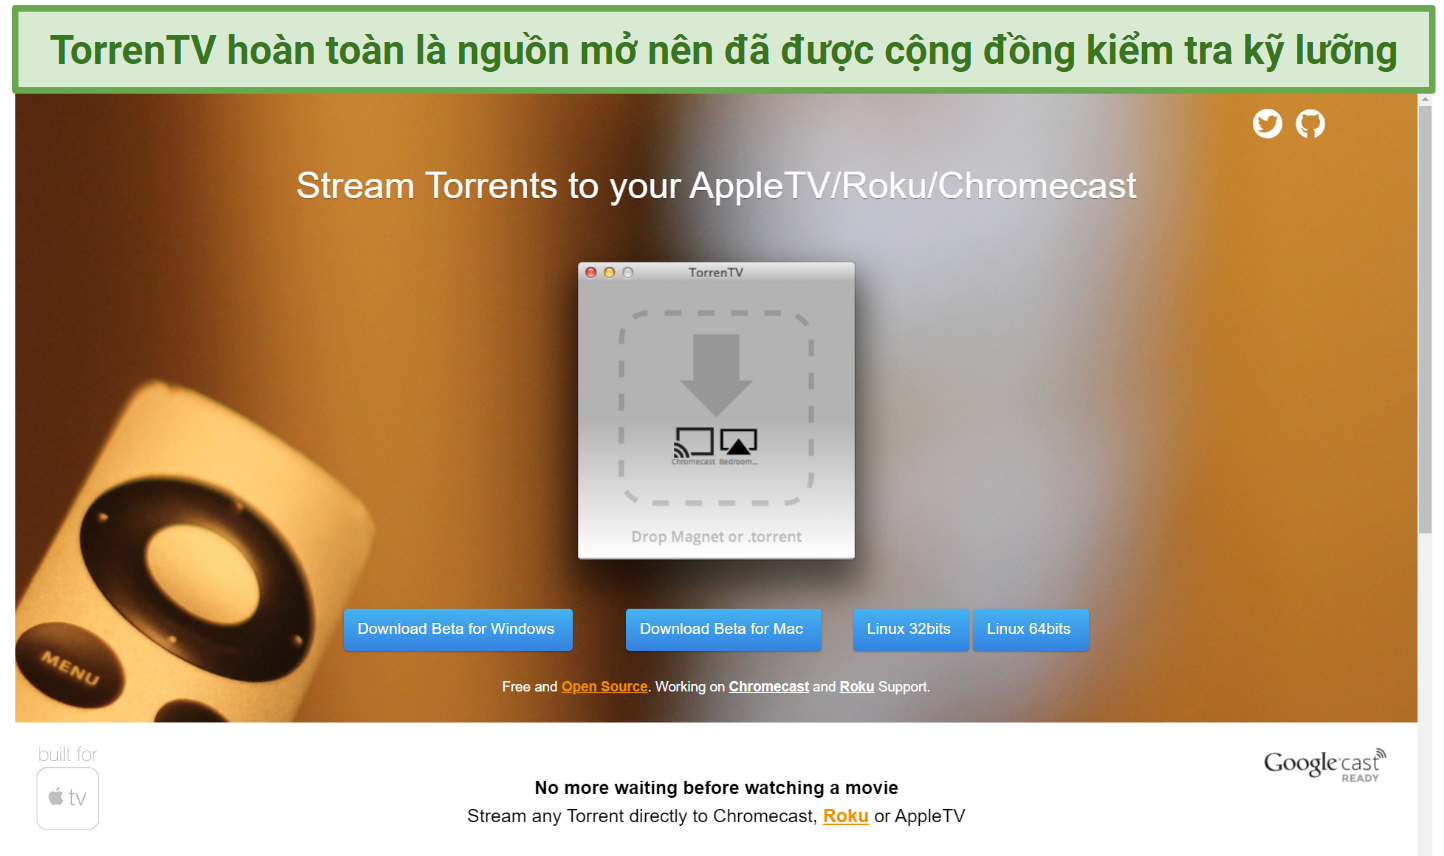 Screenshot of TorrenTV homepage with download options for different devices.